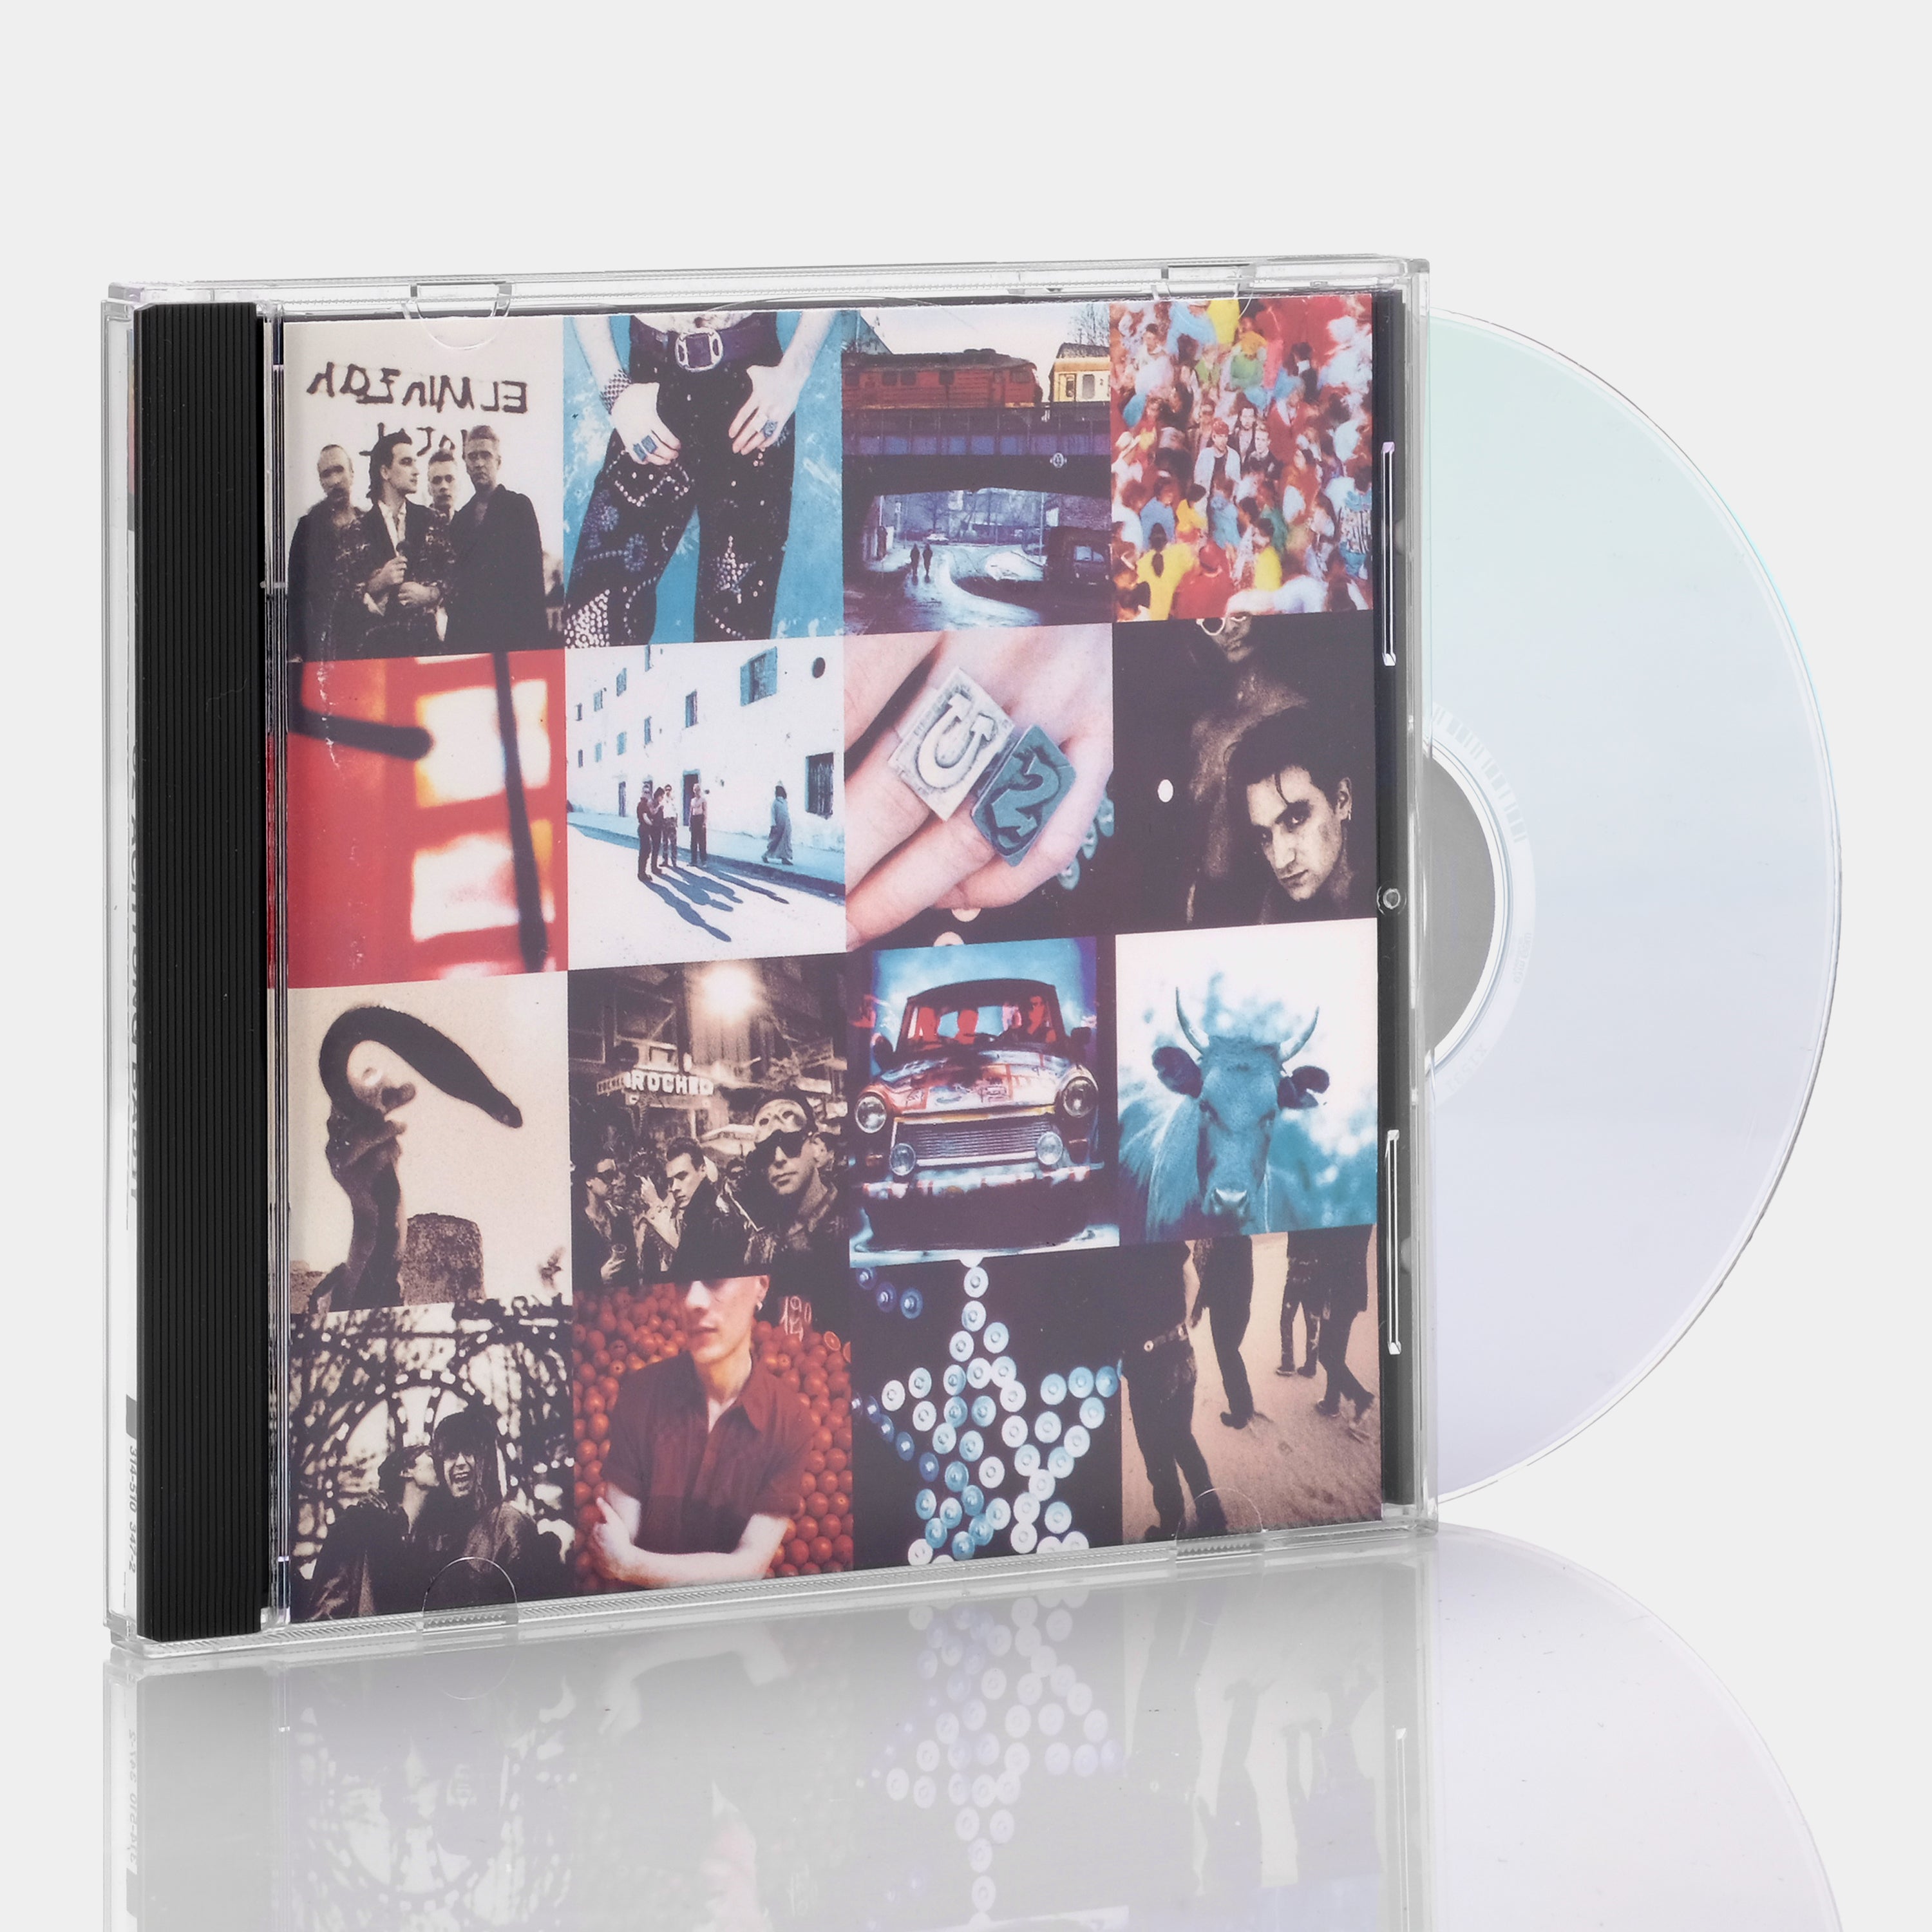 Achtung Baby (Super Deluxe Edition): CDs & Vinyl 